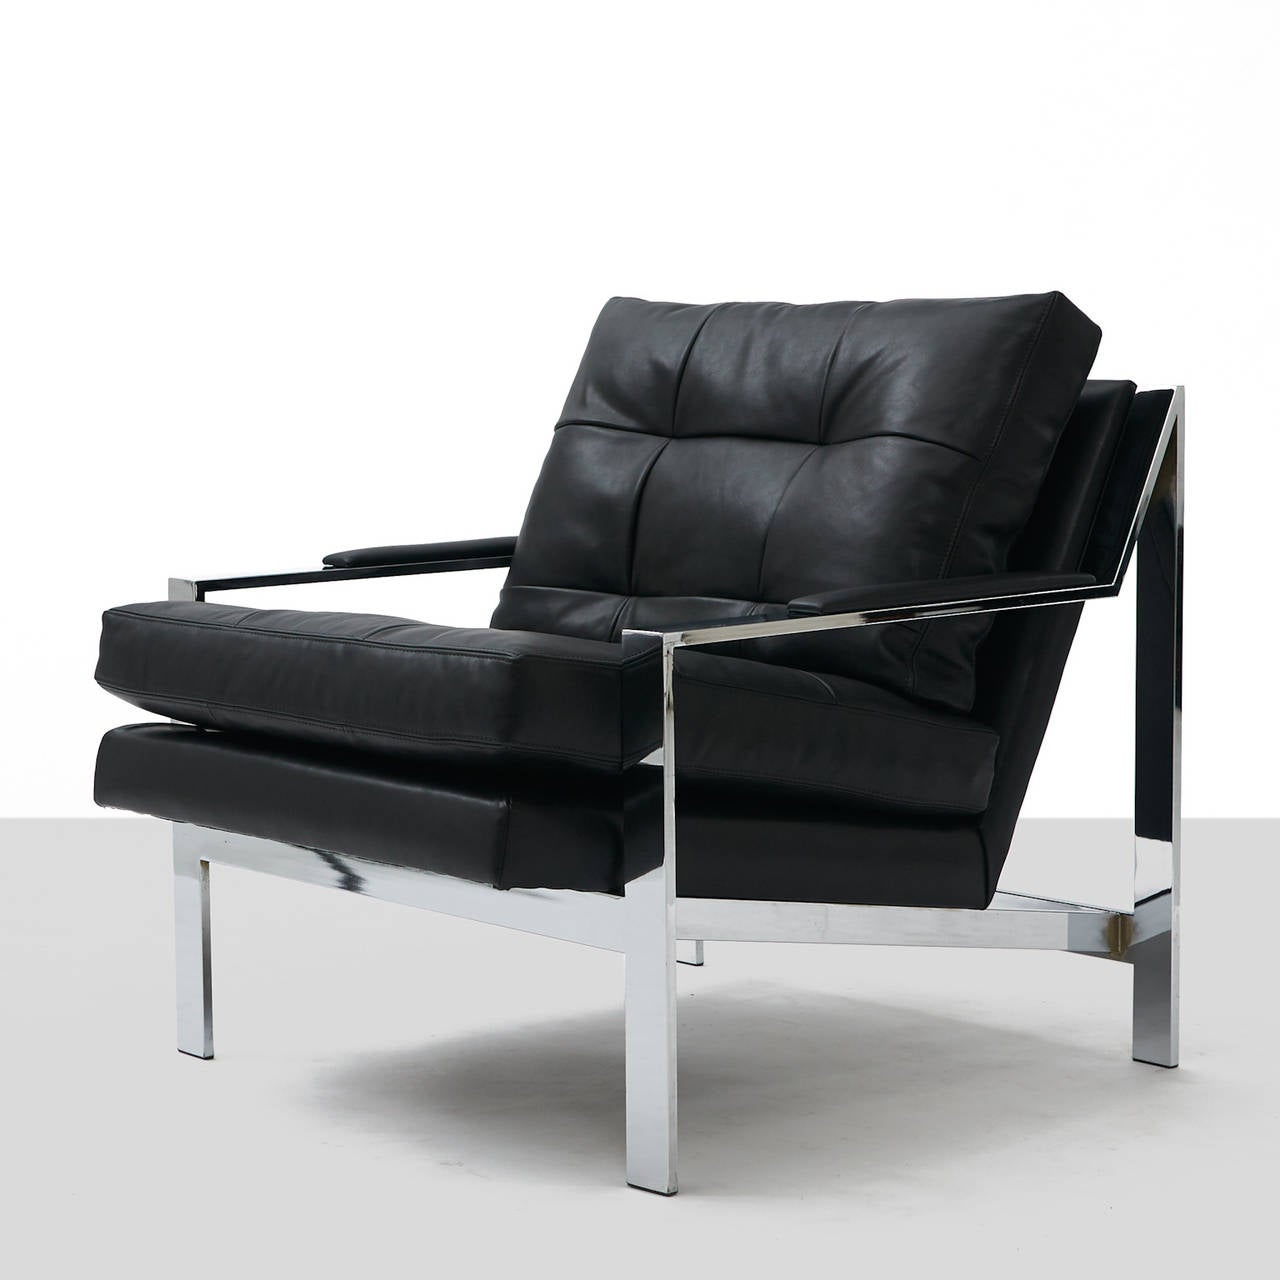 Pair of Black Leather and Chrome Lounge Chairs at 1stdibs